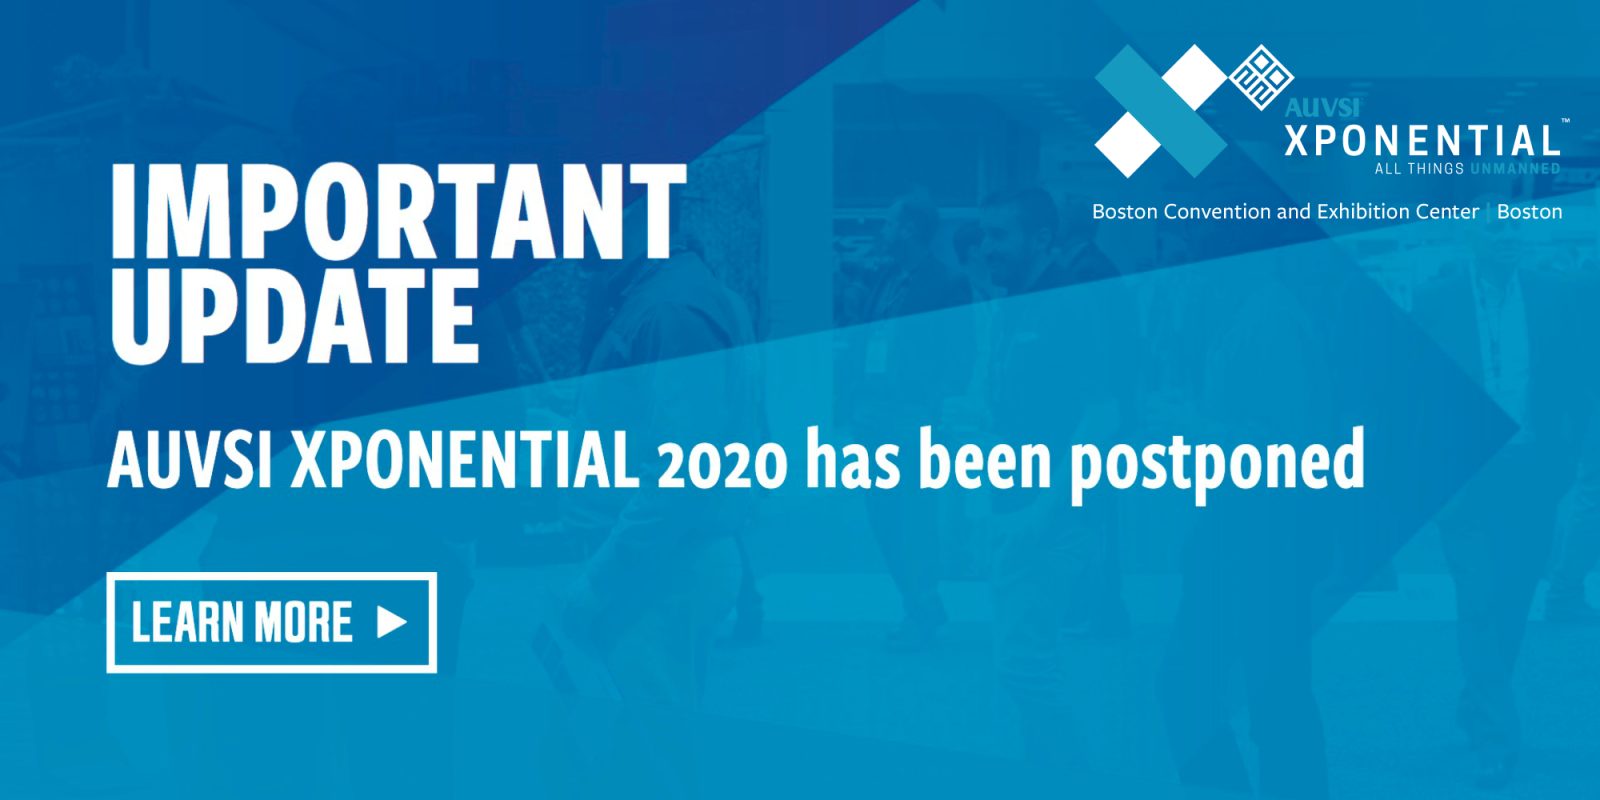 Just now we learn that AUVSI has decided to postpone the XPonential 2020 event in Boston. The new tentatively identified the dates are August 10-12 for the 2020 event. See below for more information.